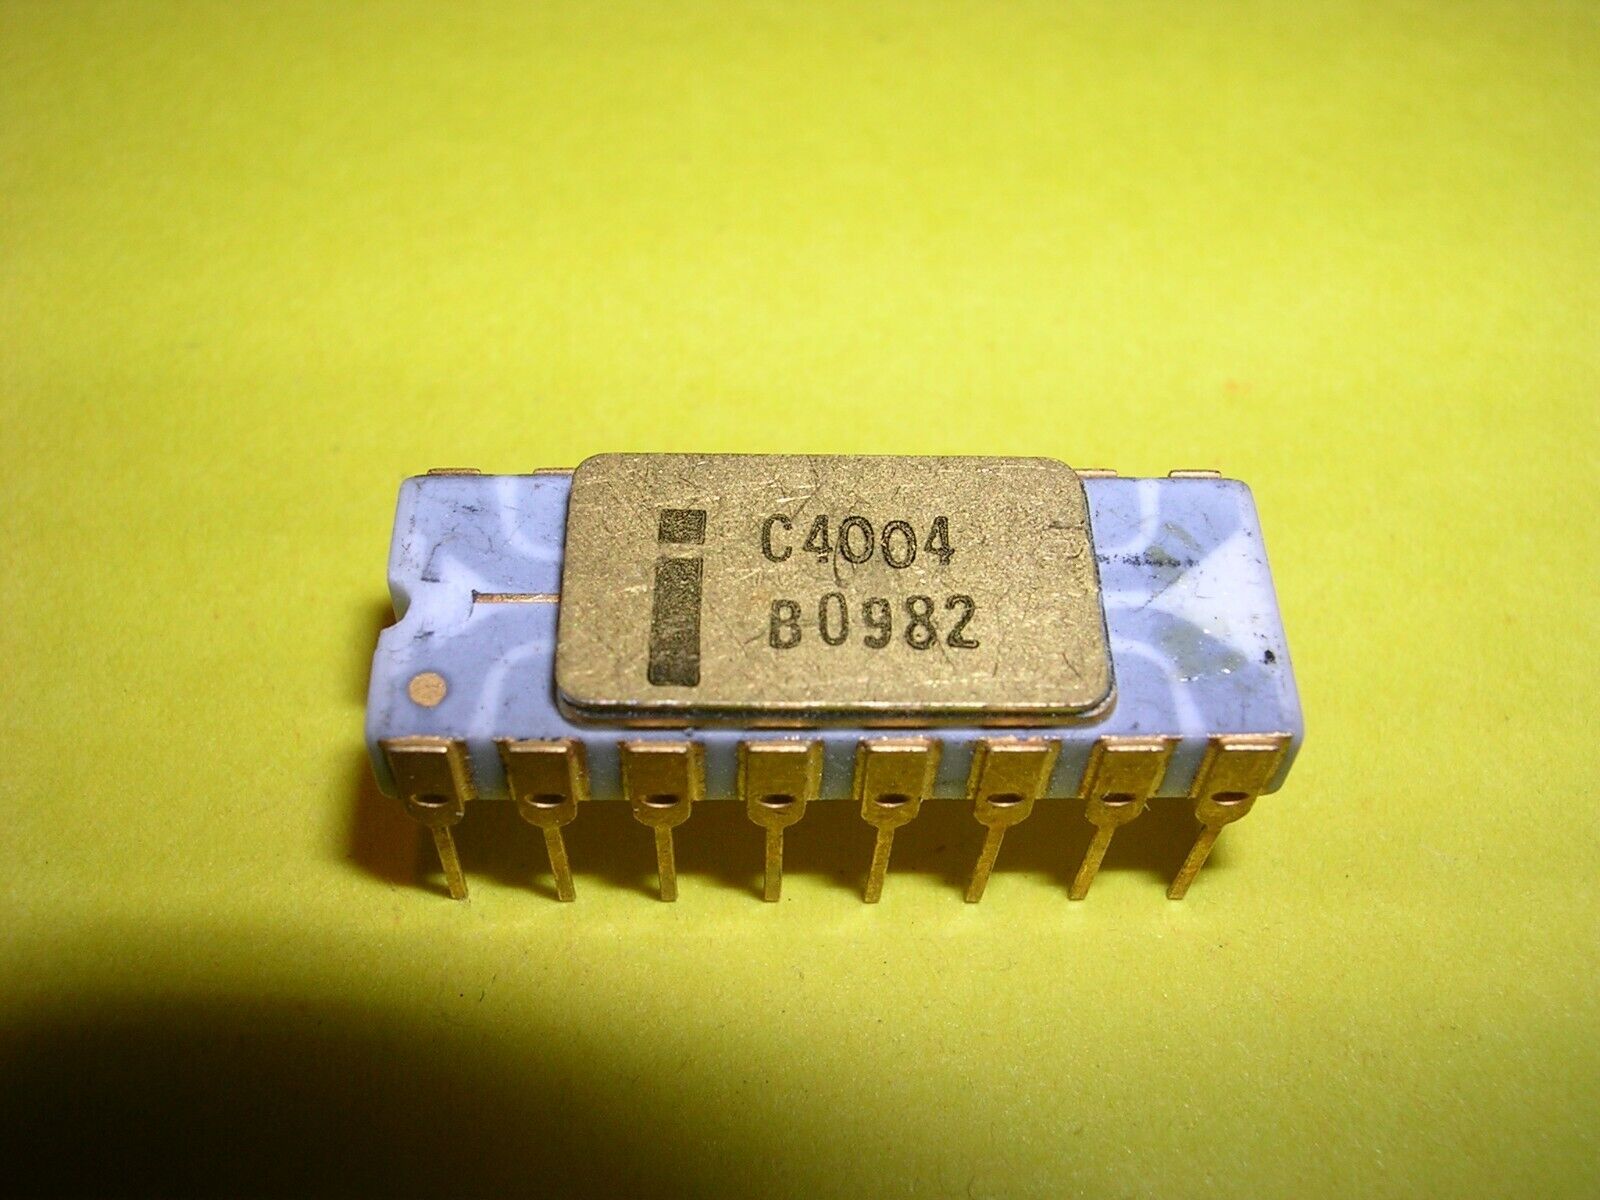 Intel C4004 with Gray Traces - World's First Microprocessor - Extremely Rare